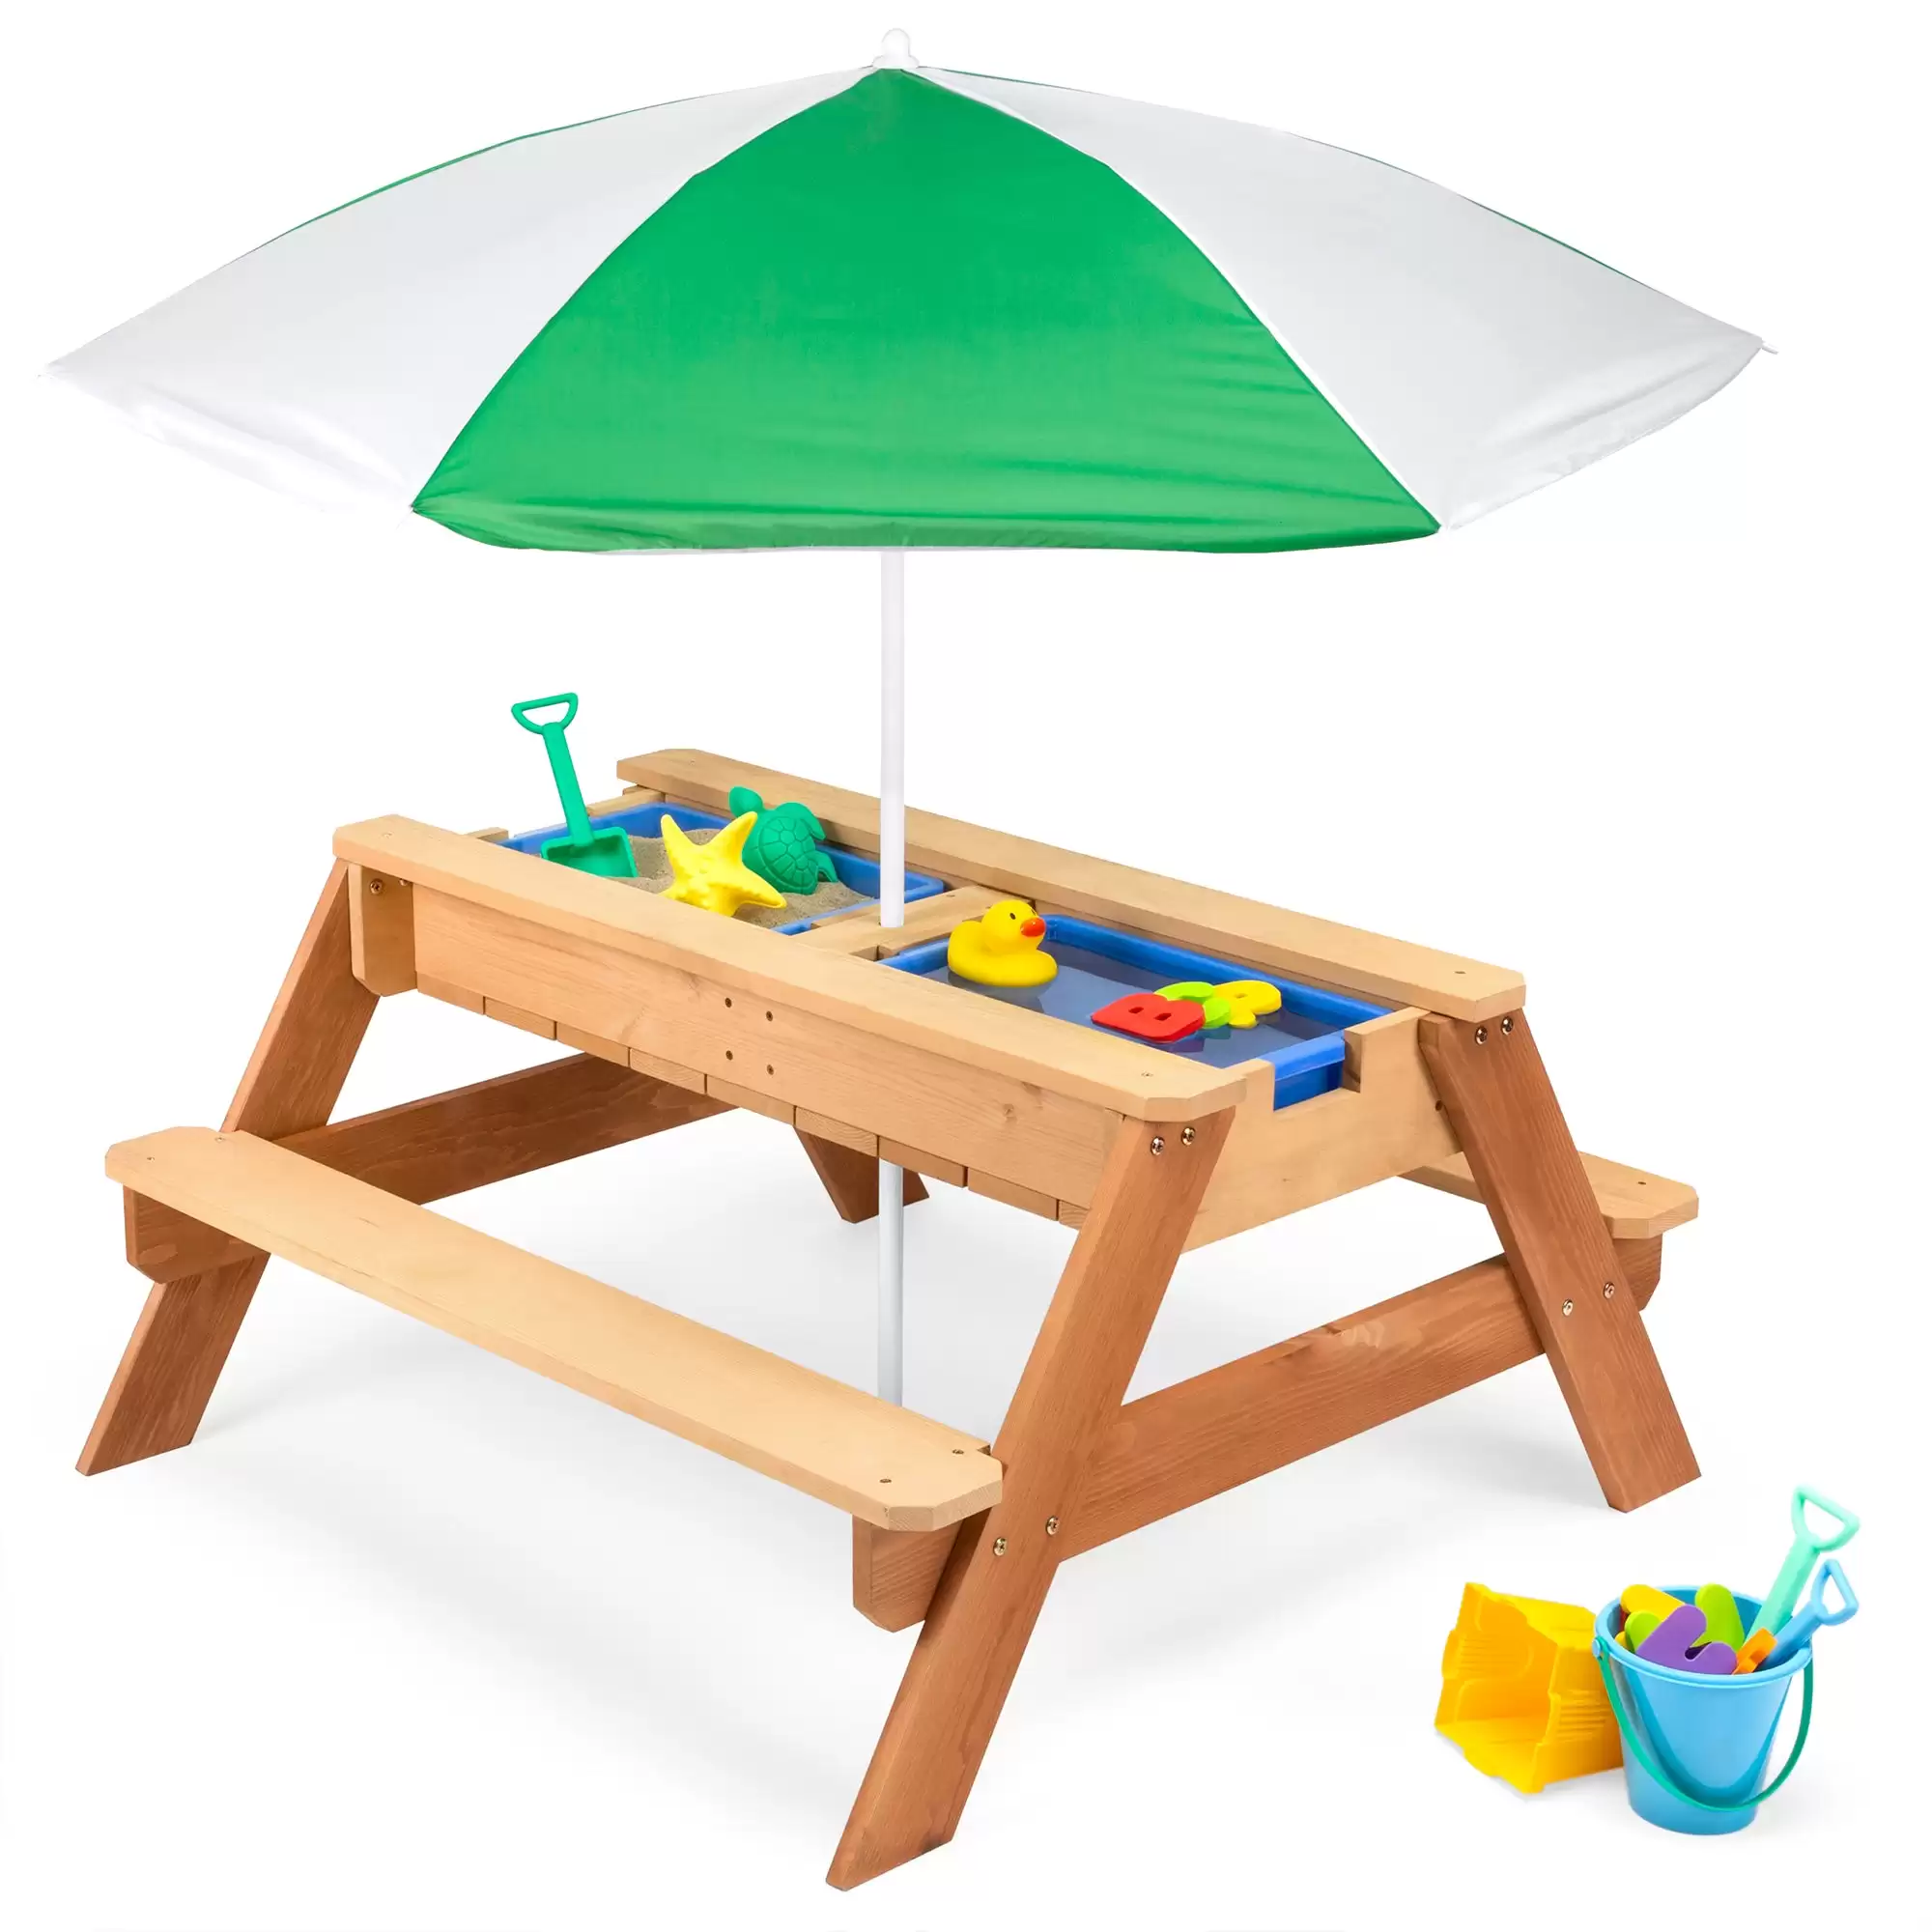 Buy $99.99 3-In-1 Kids Sand & Water Table Outdoor Wood Picnic Table W/ Umbrella At Bestchoiceproducts